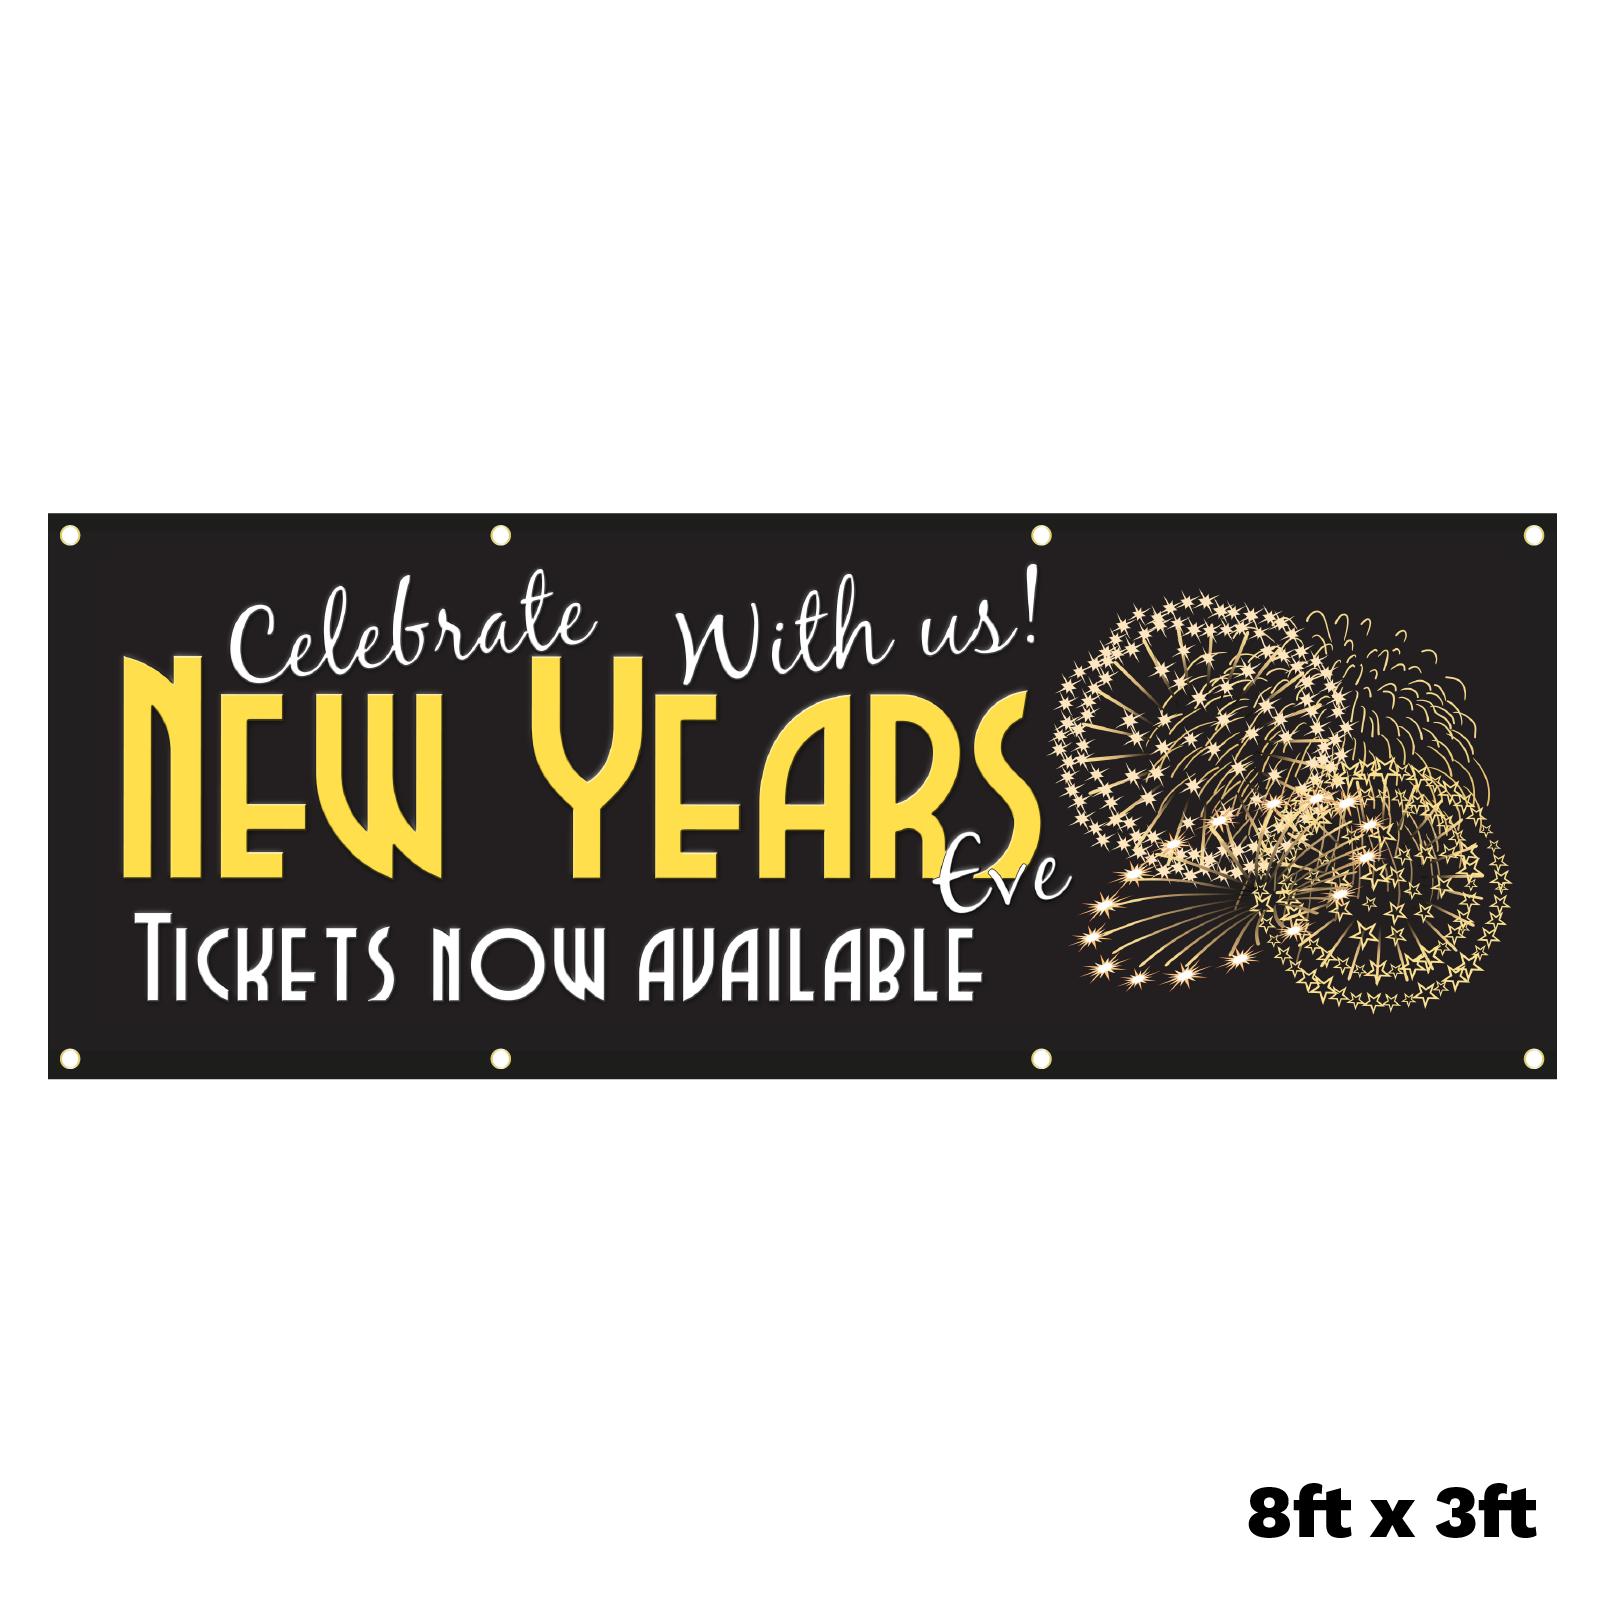 New Years Eve Tickets Now Available | PVC Banner | Christmas Advertising